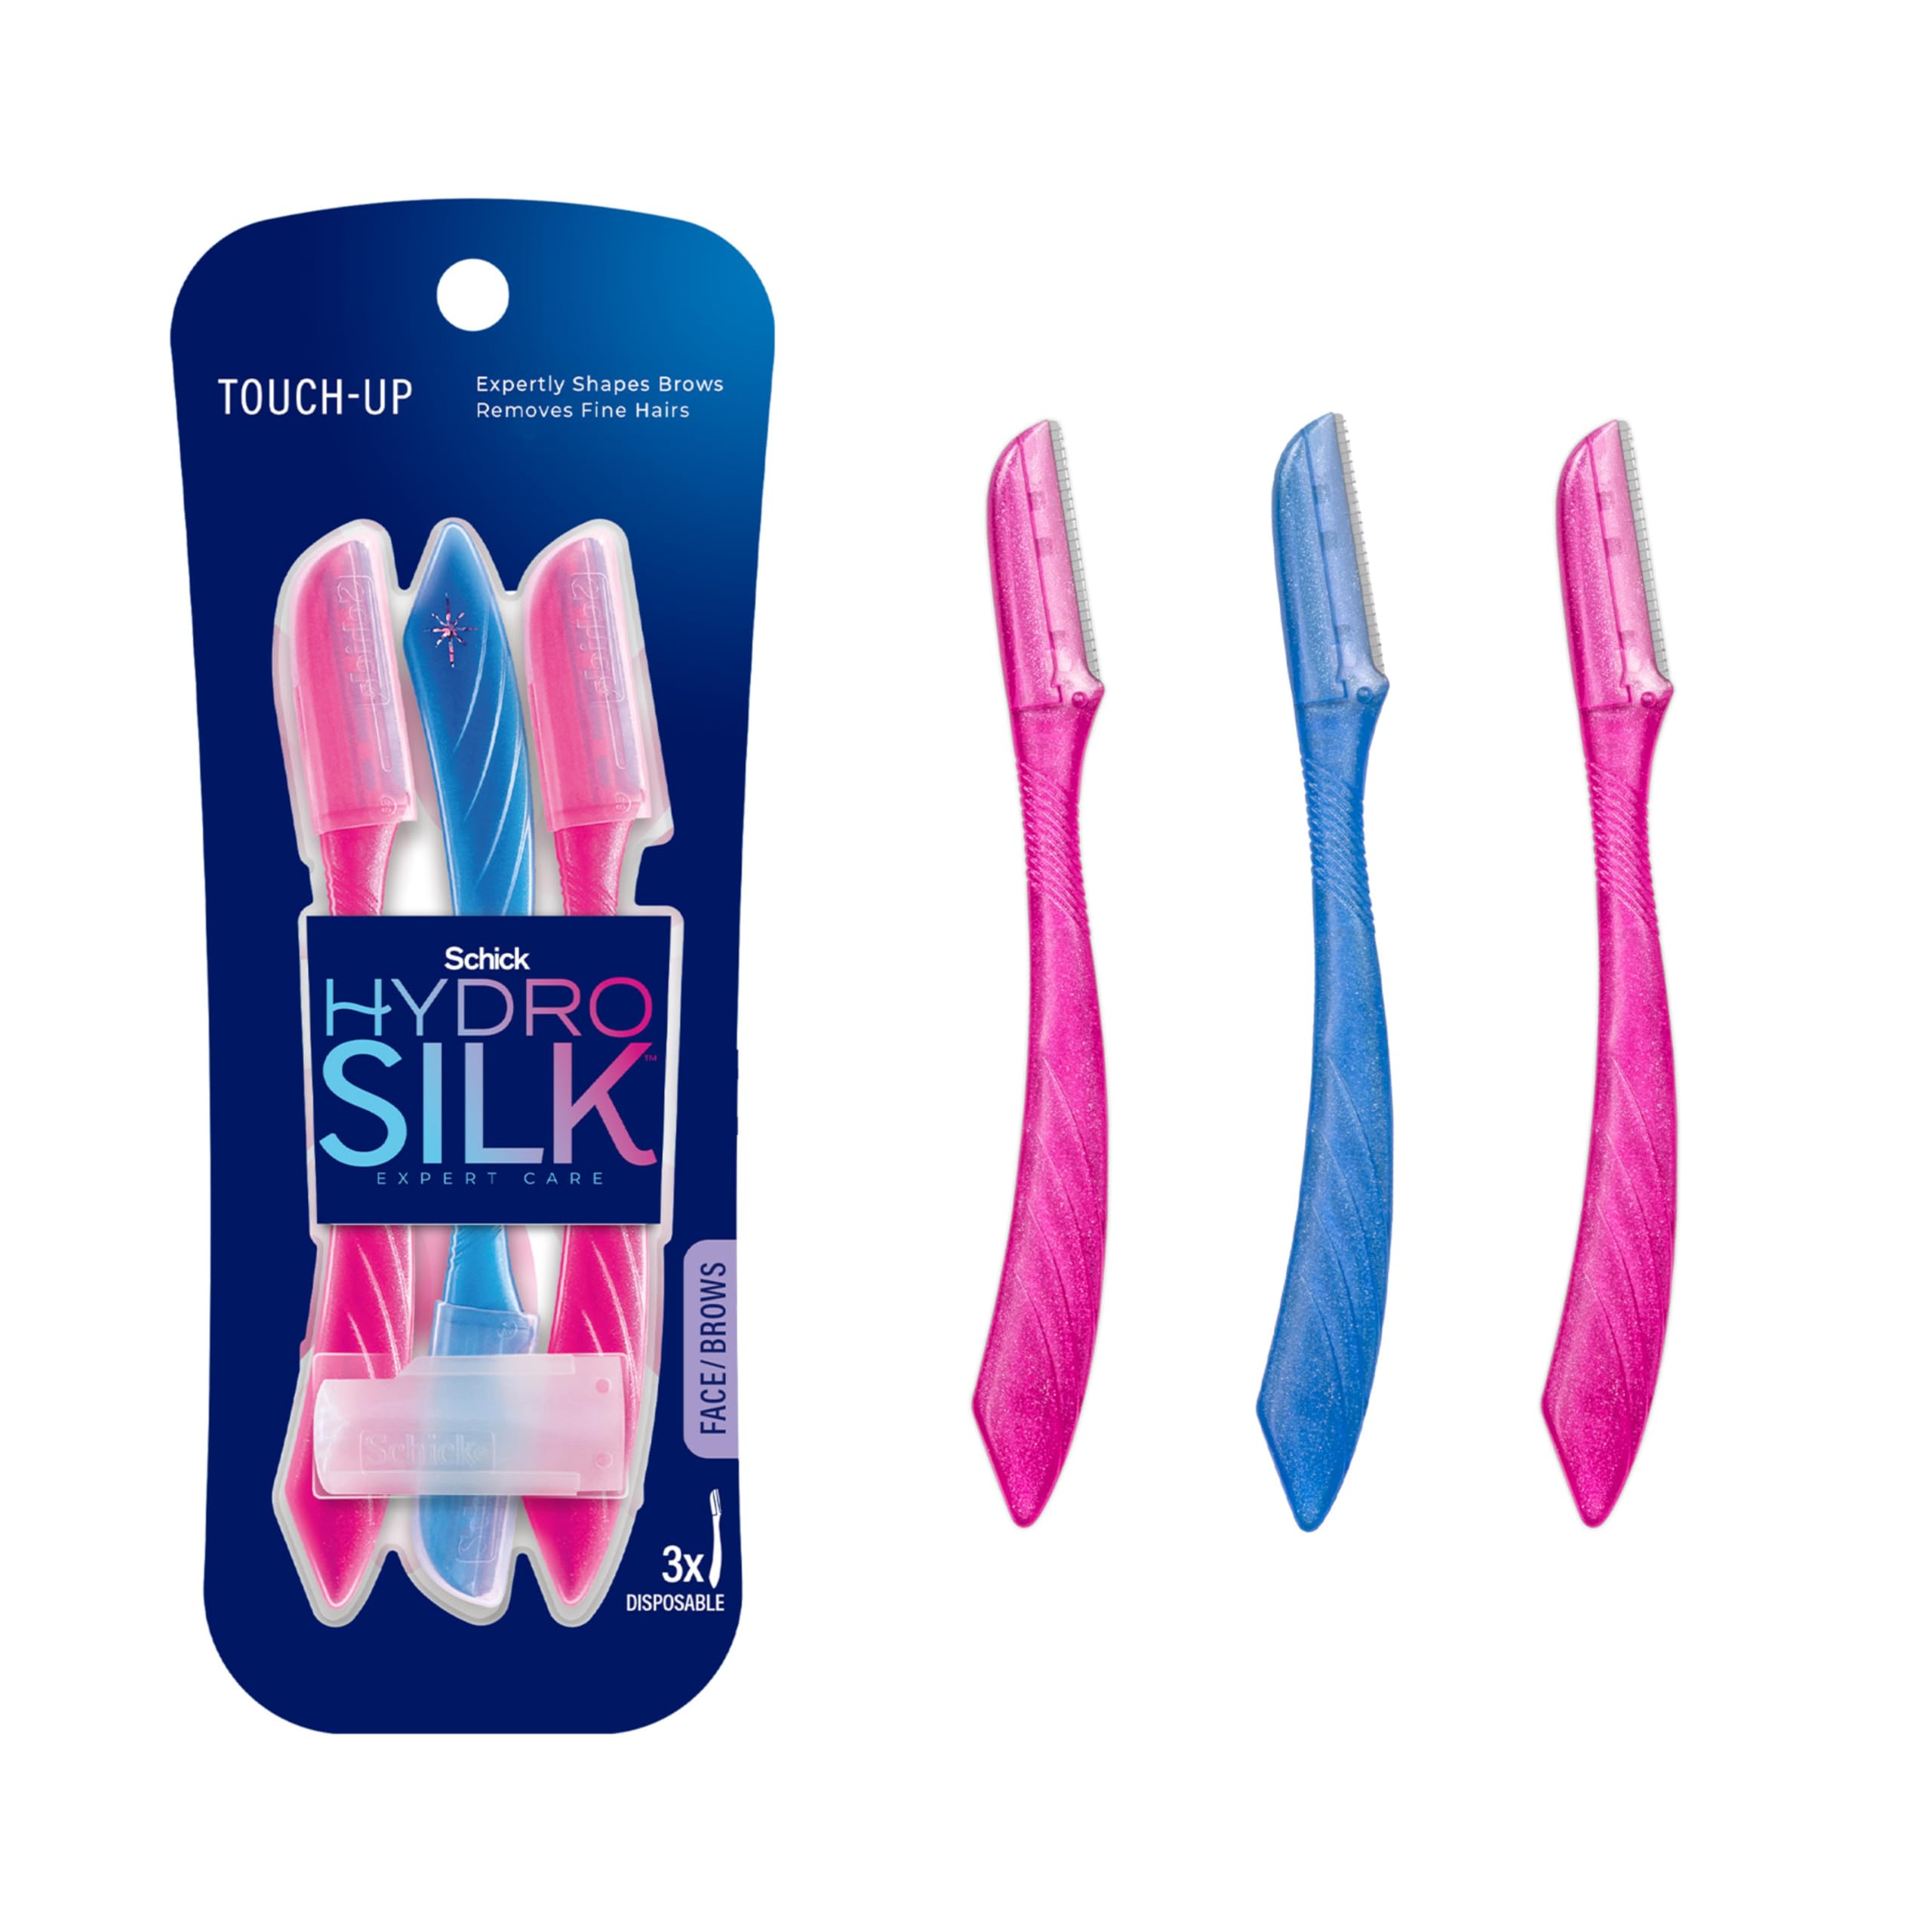 3-Count Schick Hydro Silk Touch-Up Multipurpose Exfoliating Dermaplaning Eyebrow Facial Razor w/ Precision Cover $1.70 (.56c Ea) w/ S&S + Free Shipping w/ Prime or on $35+